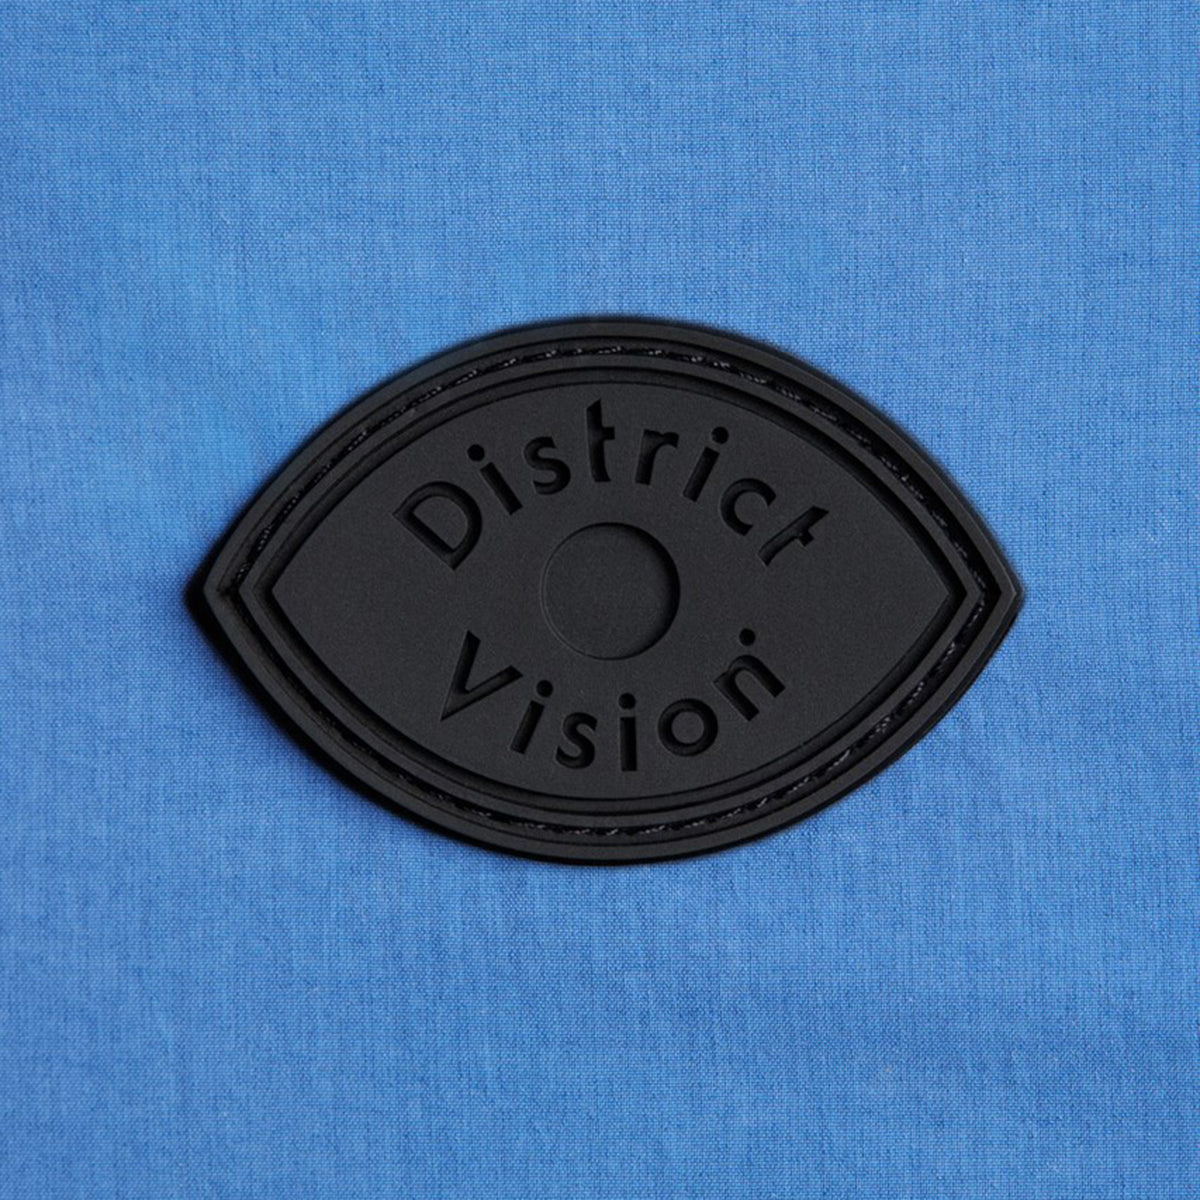 District Vision Theo Full Zip Shell